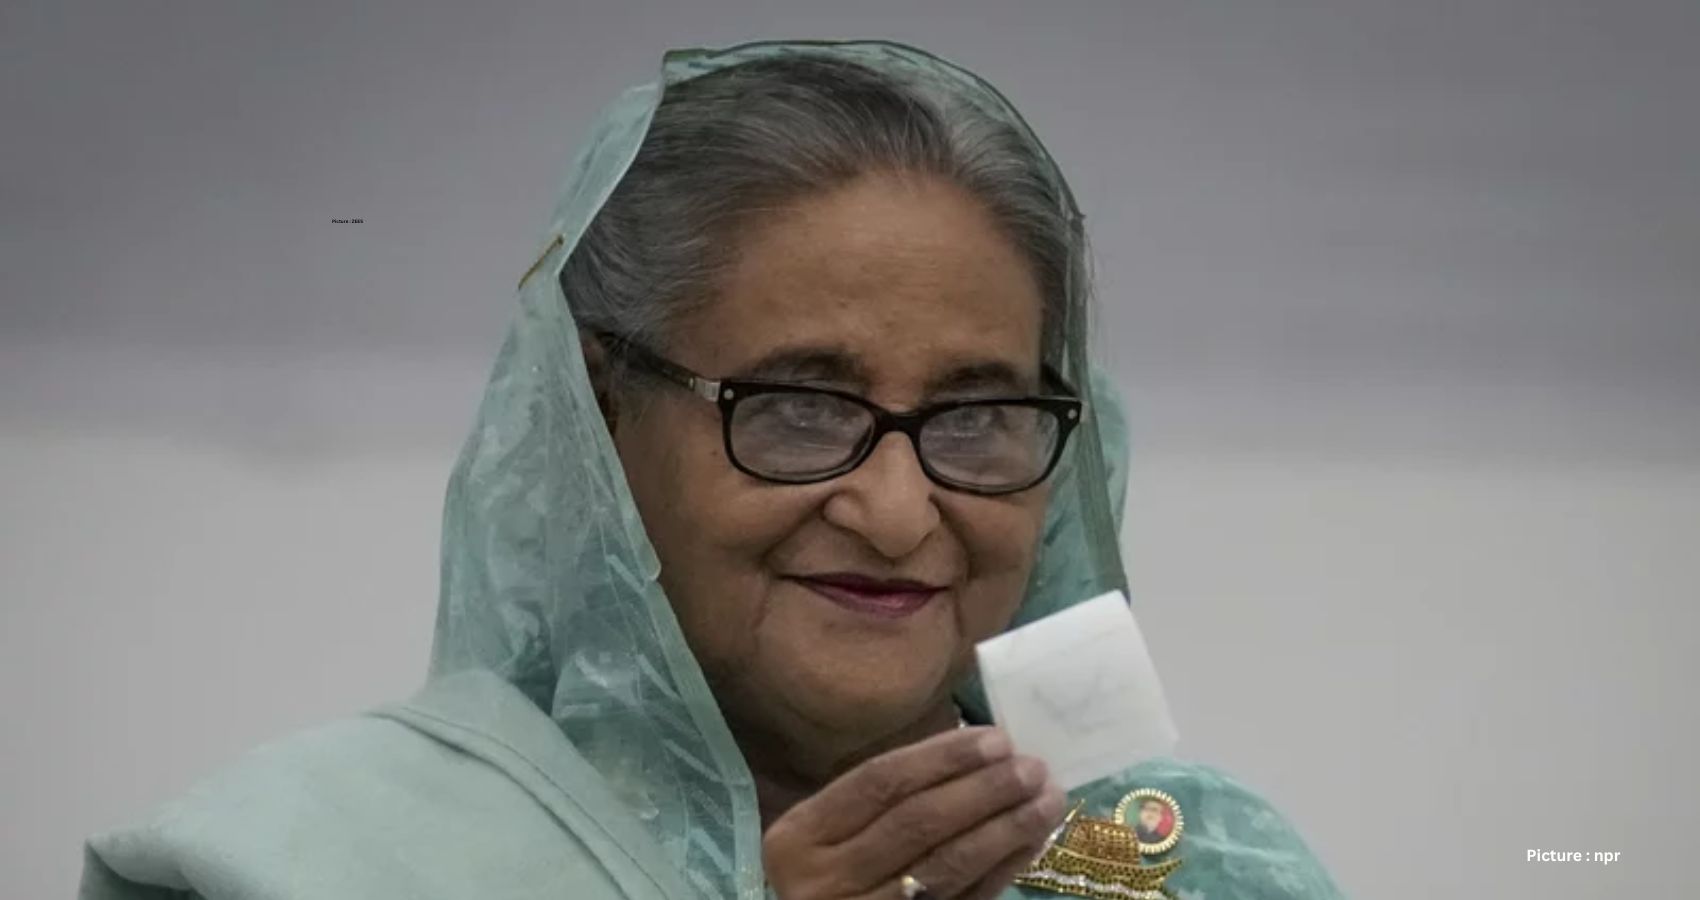 Prime Minister Sheikh Hasina Secures Fourth Consecutive Term Amid Controversy in Bangladesh Election